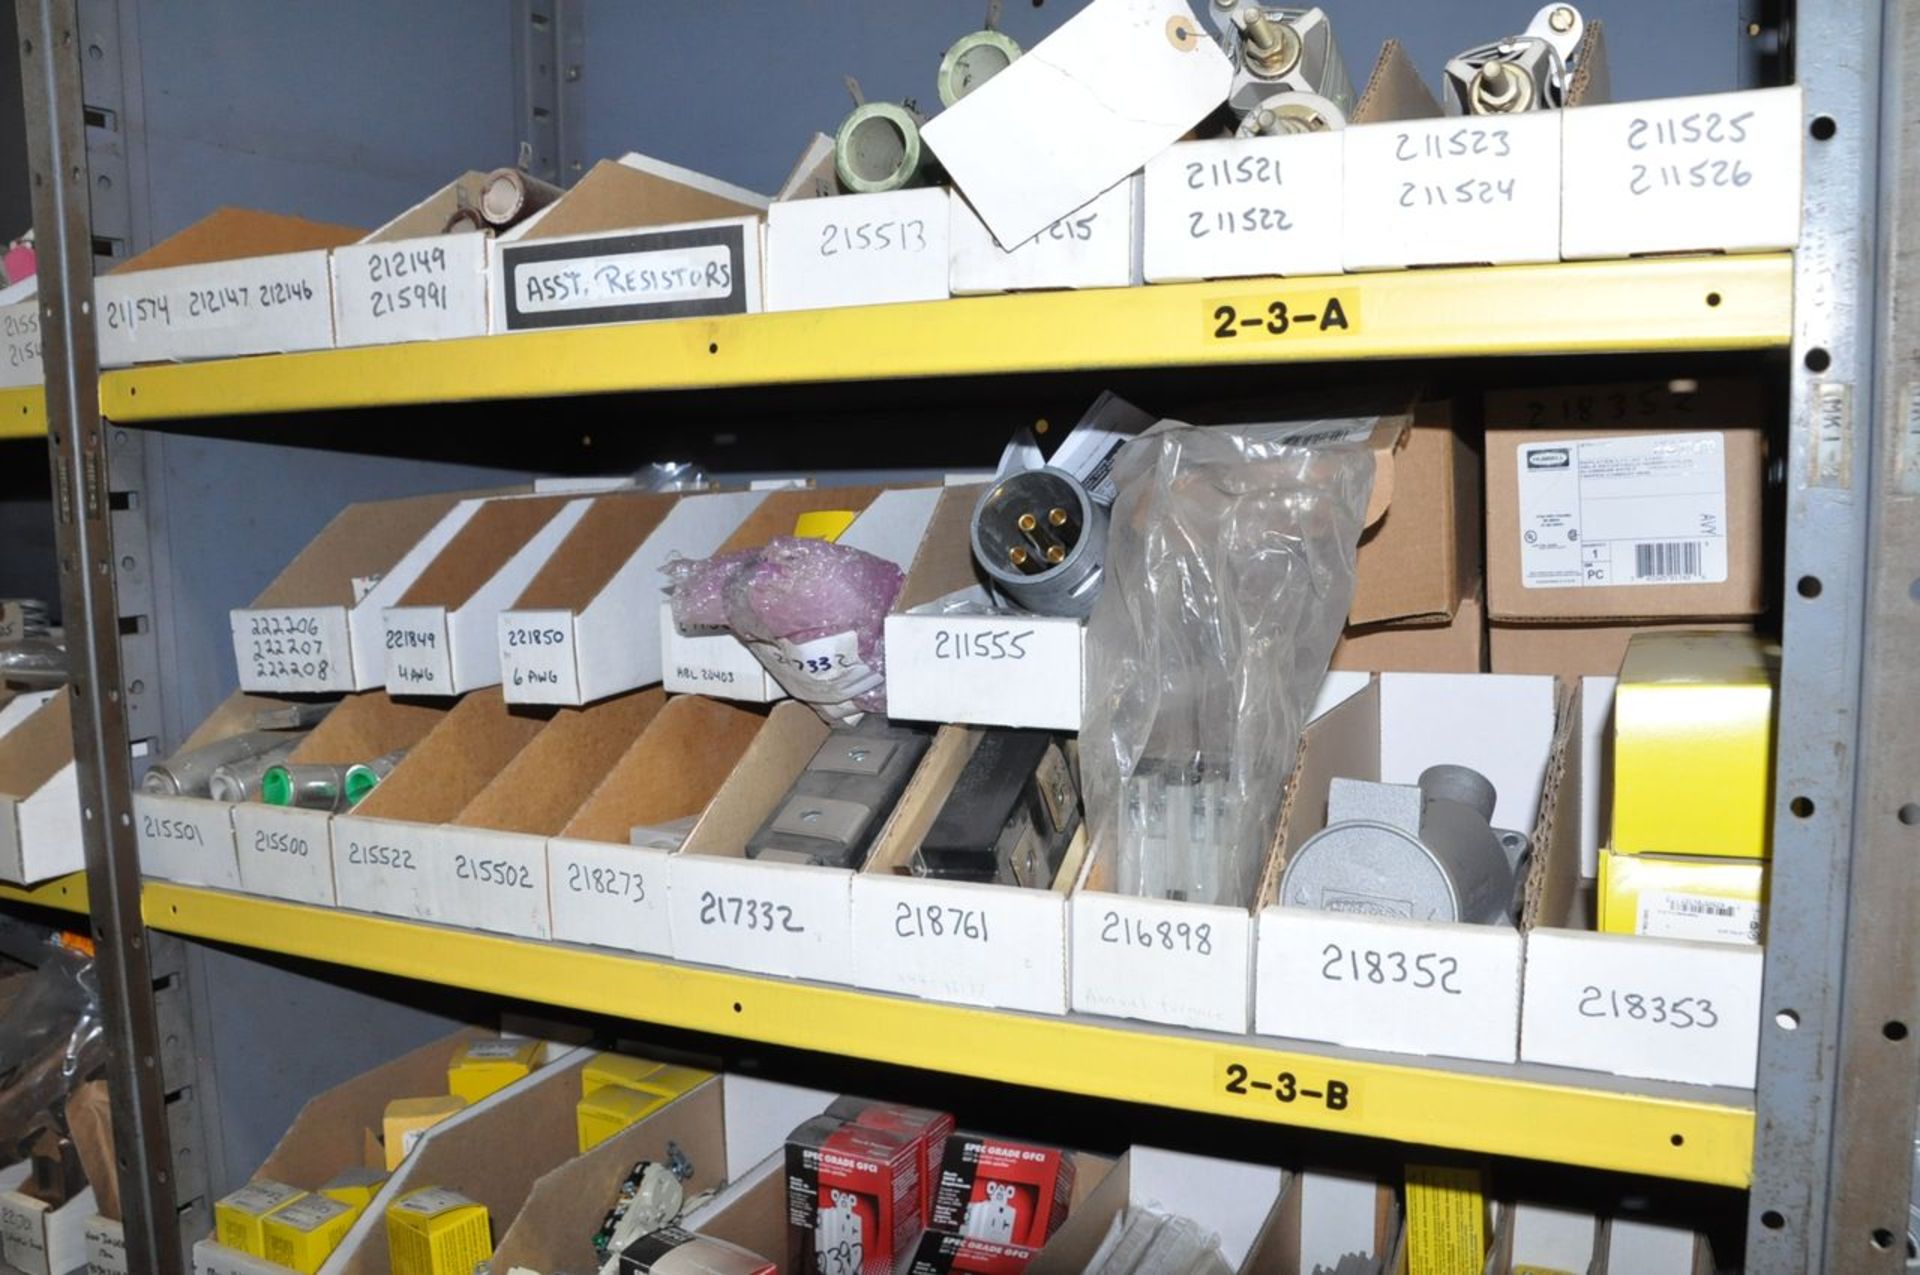 Lot - Pipe Fittings, Wire Spools, Electrical Hardware, Fluorescent and Incandescent Bulbs, etc. - Image 21 of 29